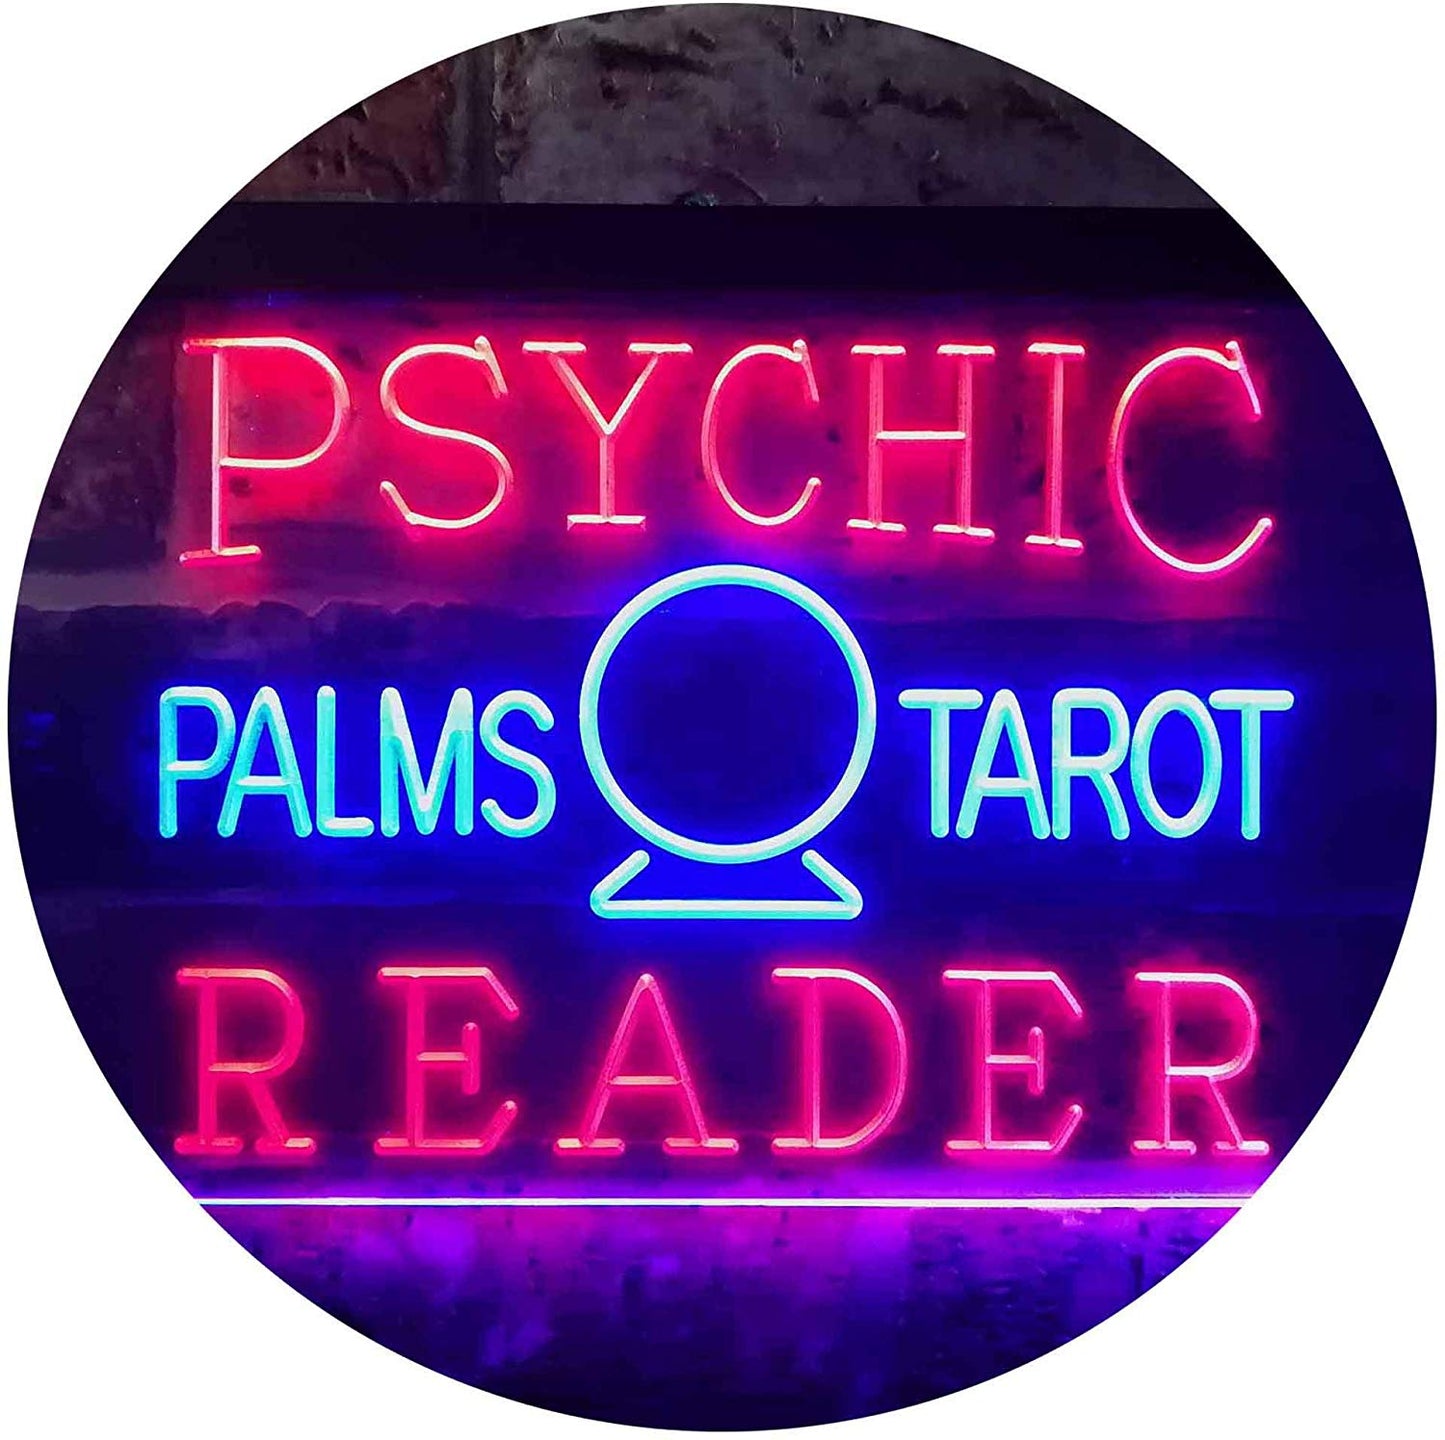 Psychic Palms Tarot Reader LED Neon Light Sign - Way Up Gifts